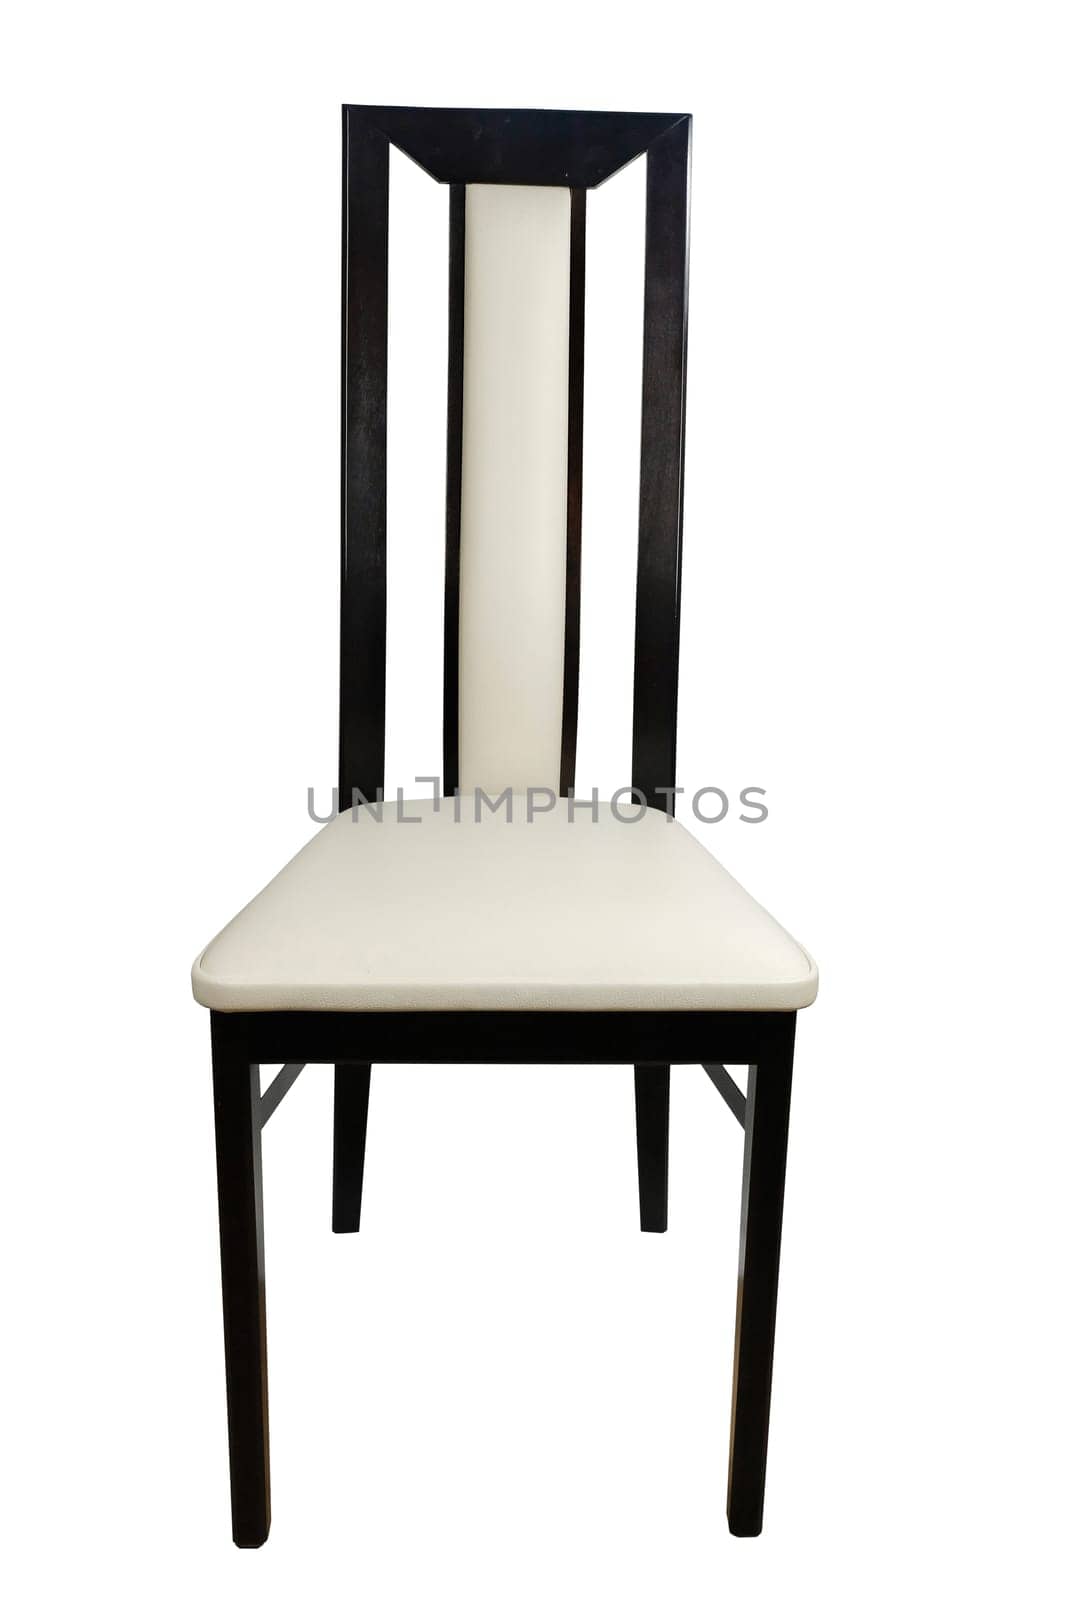 Wooden leather chair isolated on a white background.